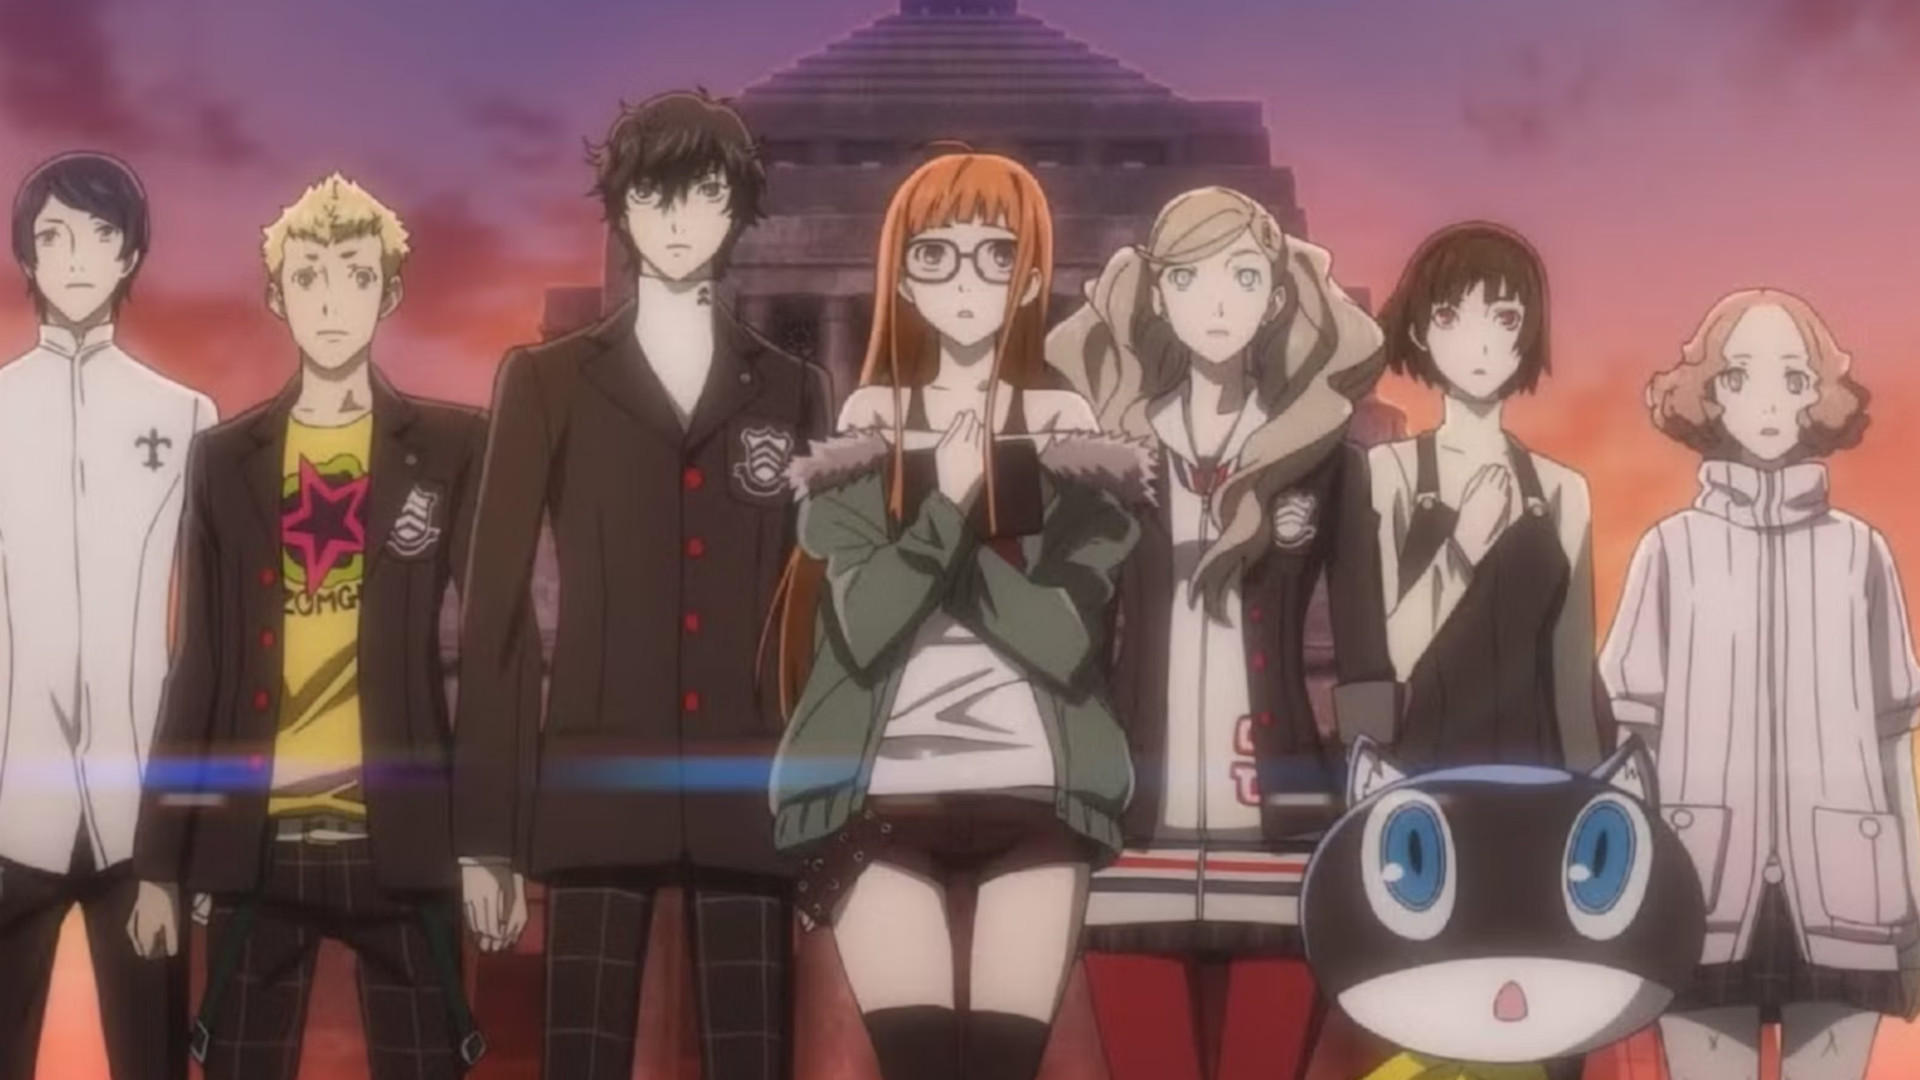 Persona 5 the Animation to be Streamed on Crunchyroll and Hulu